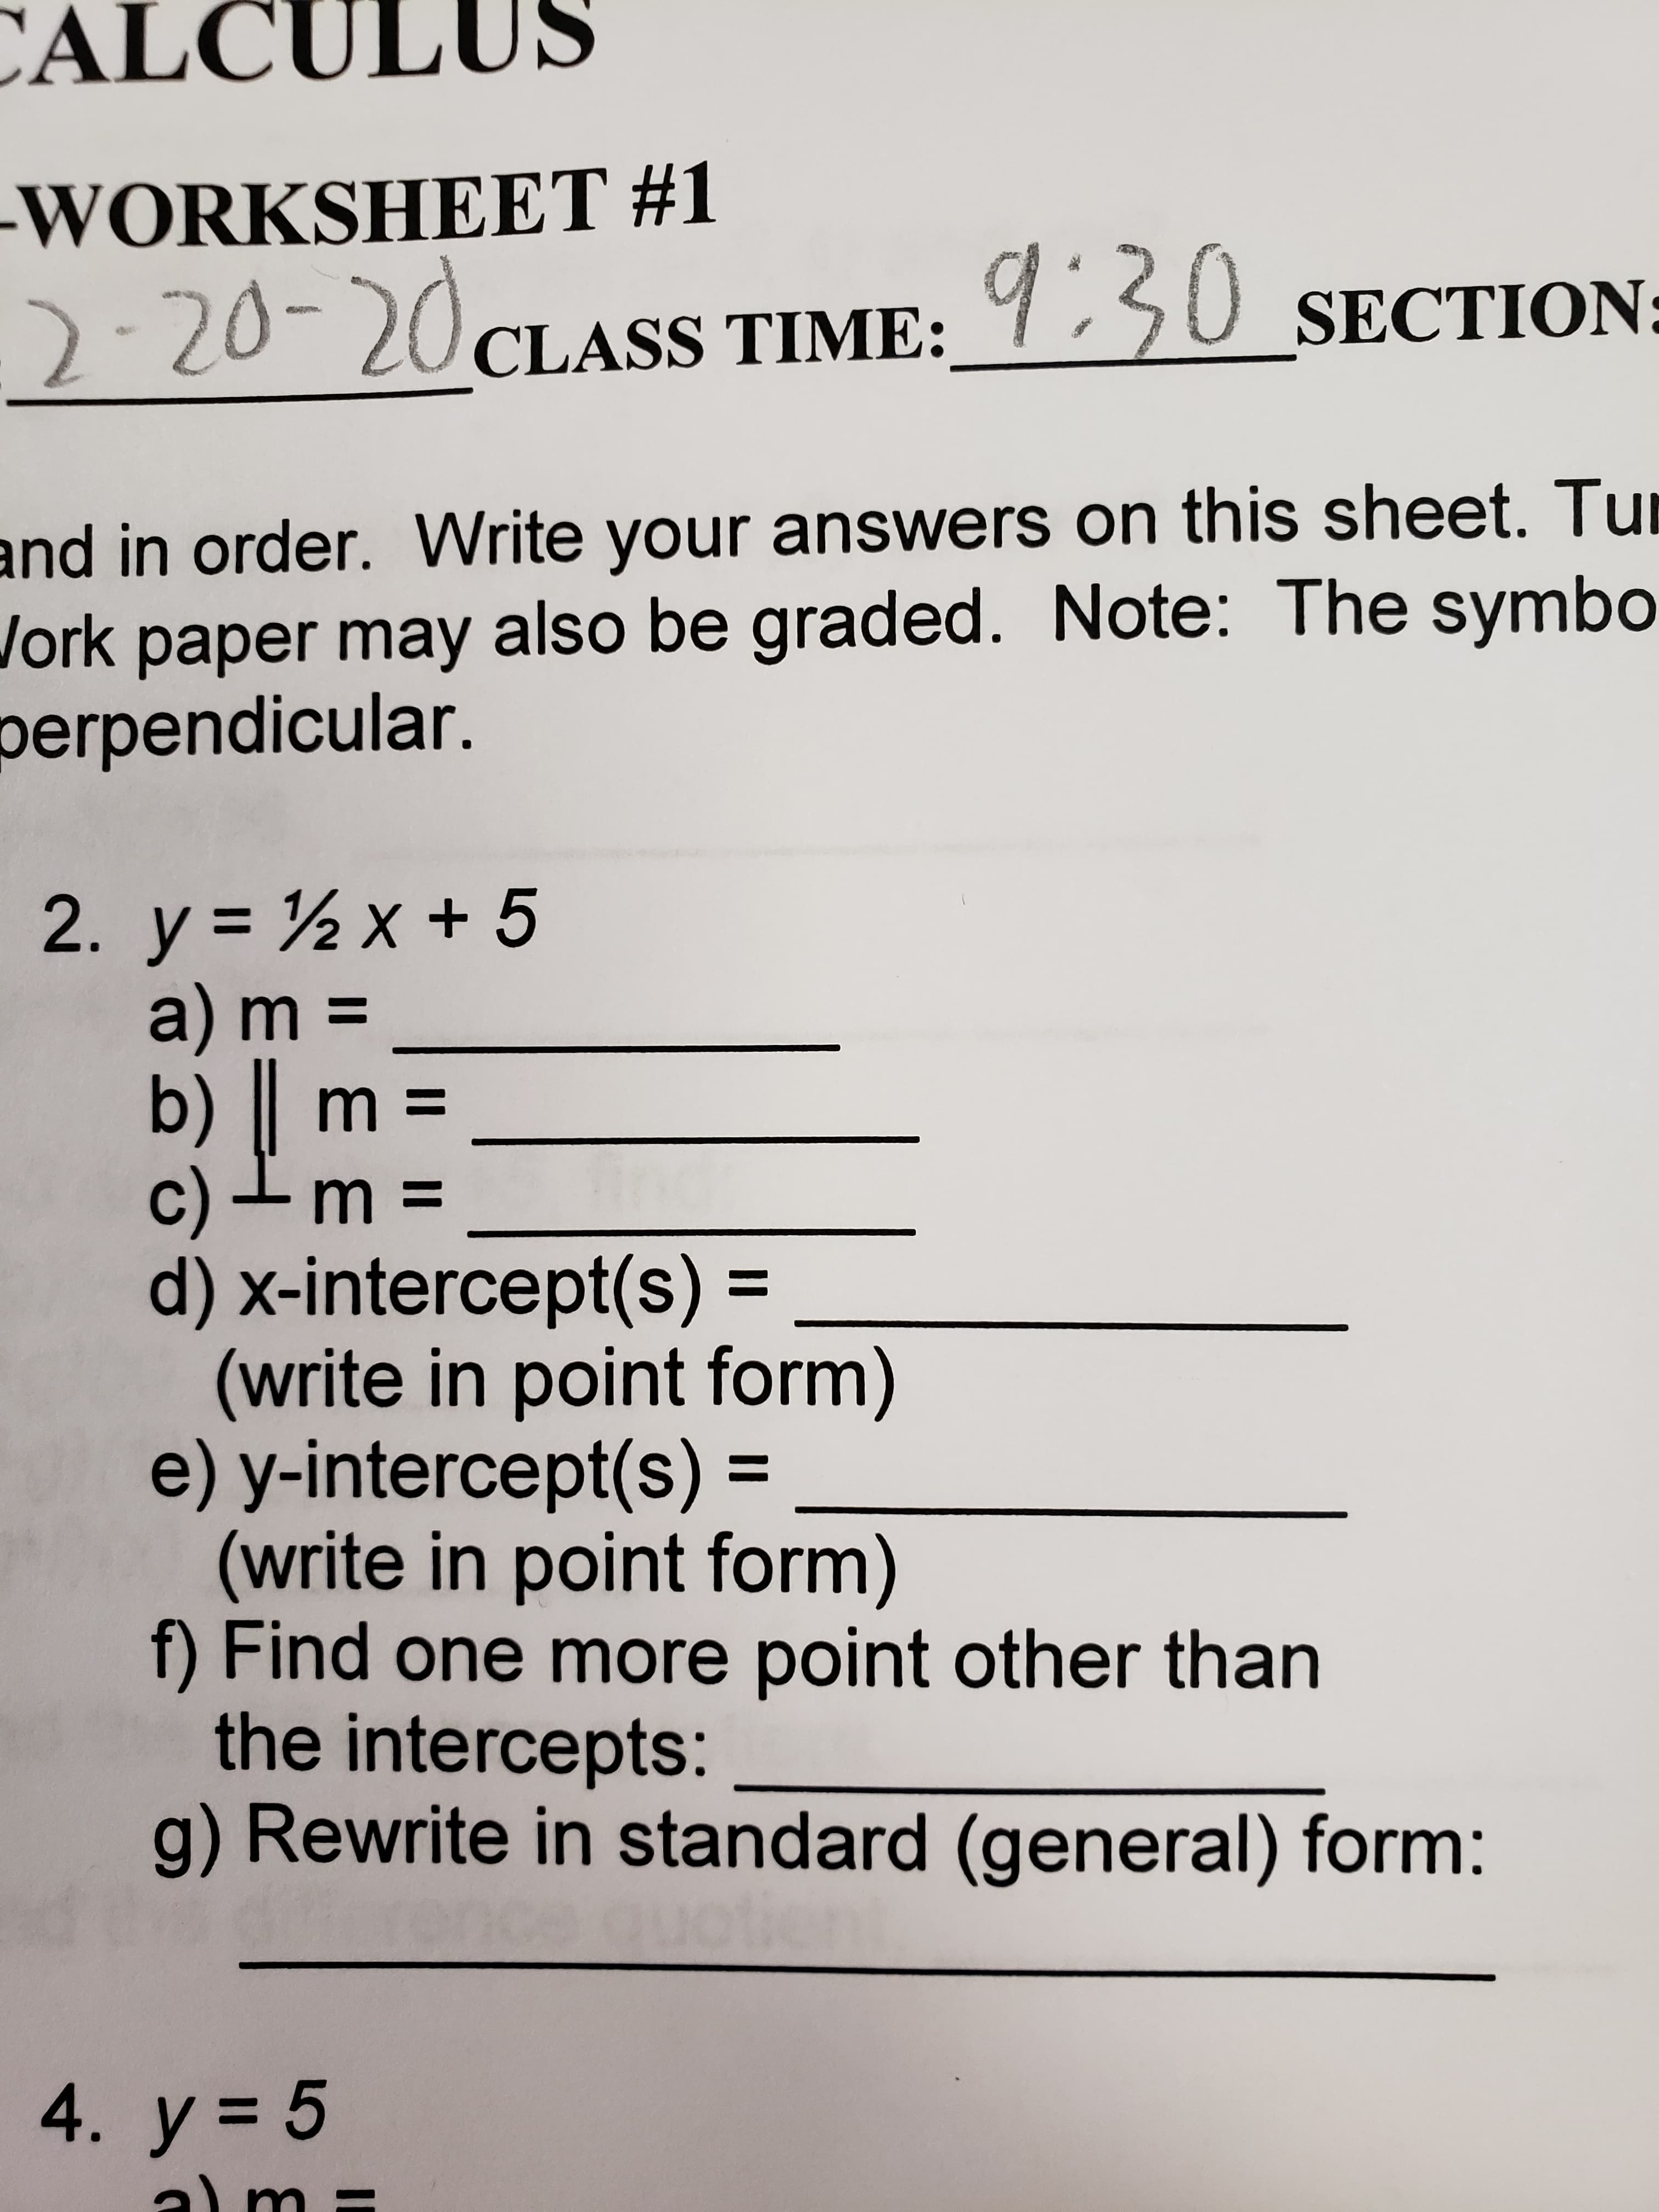 y = ½ x + 5
a) m
b) |
%3D
=
m =
C)- m =
d) x-intercept(s) =
(write in point form)
e) y-intercept(s) =
(write in point form)
f) Find one more point other than
the intercepts:
g) Rewrite in standard (general) form:
%3D
%3D
